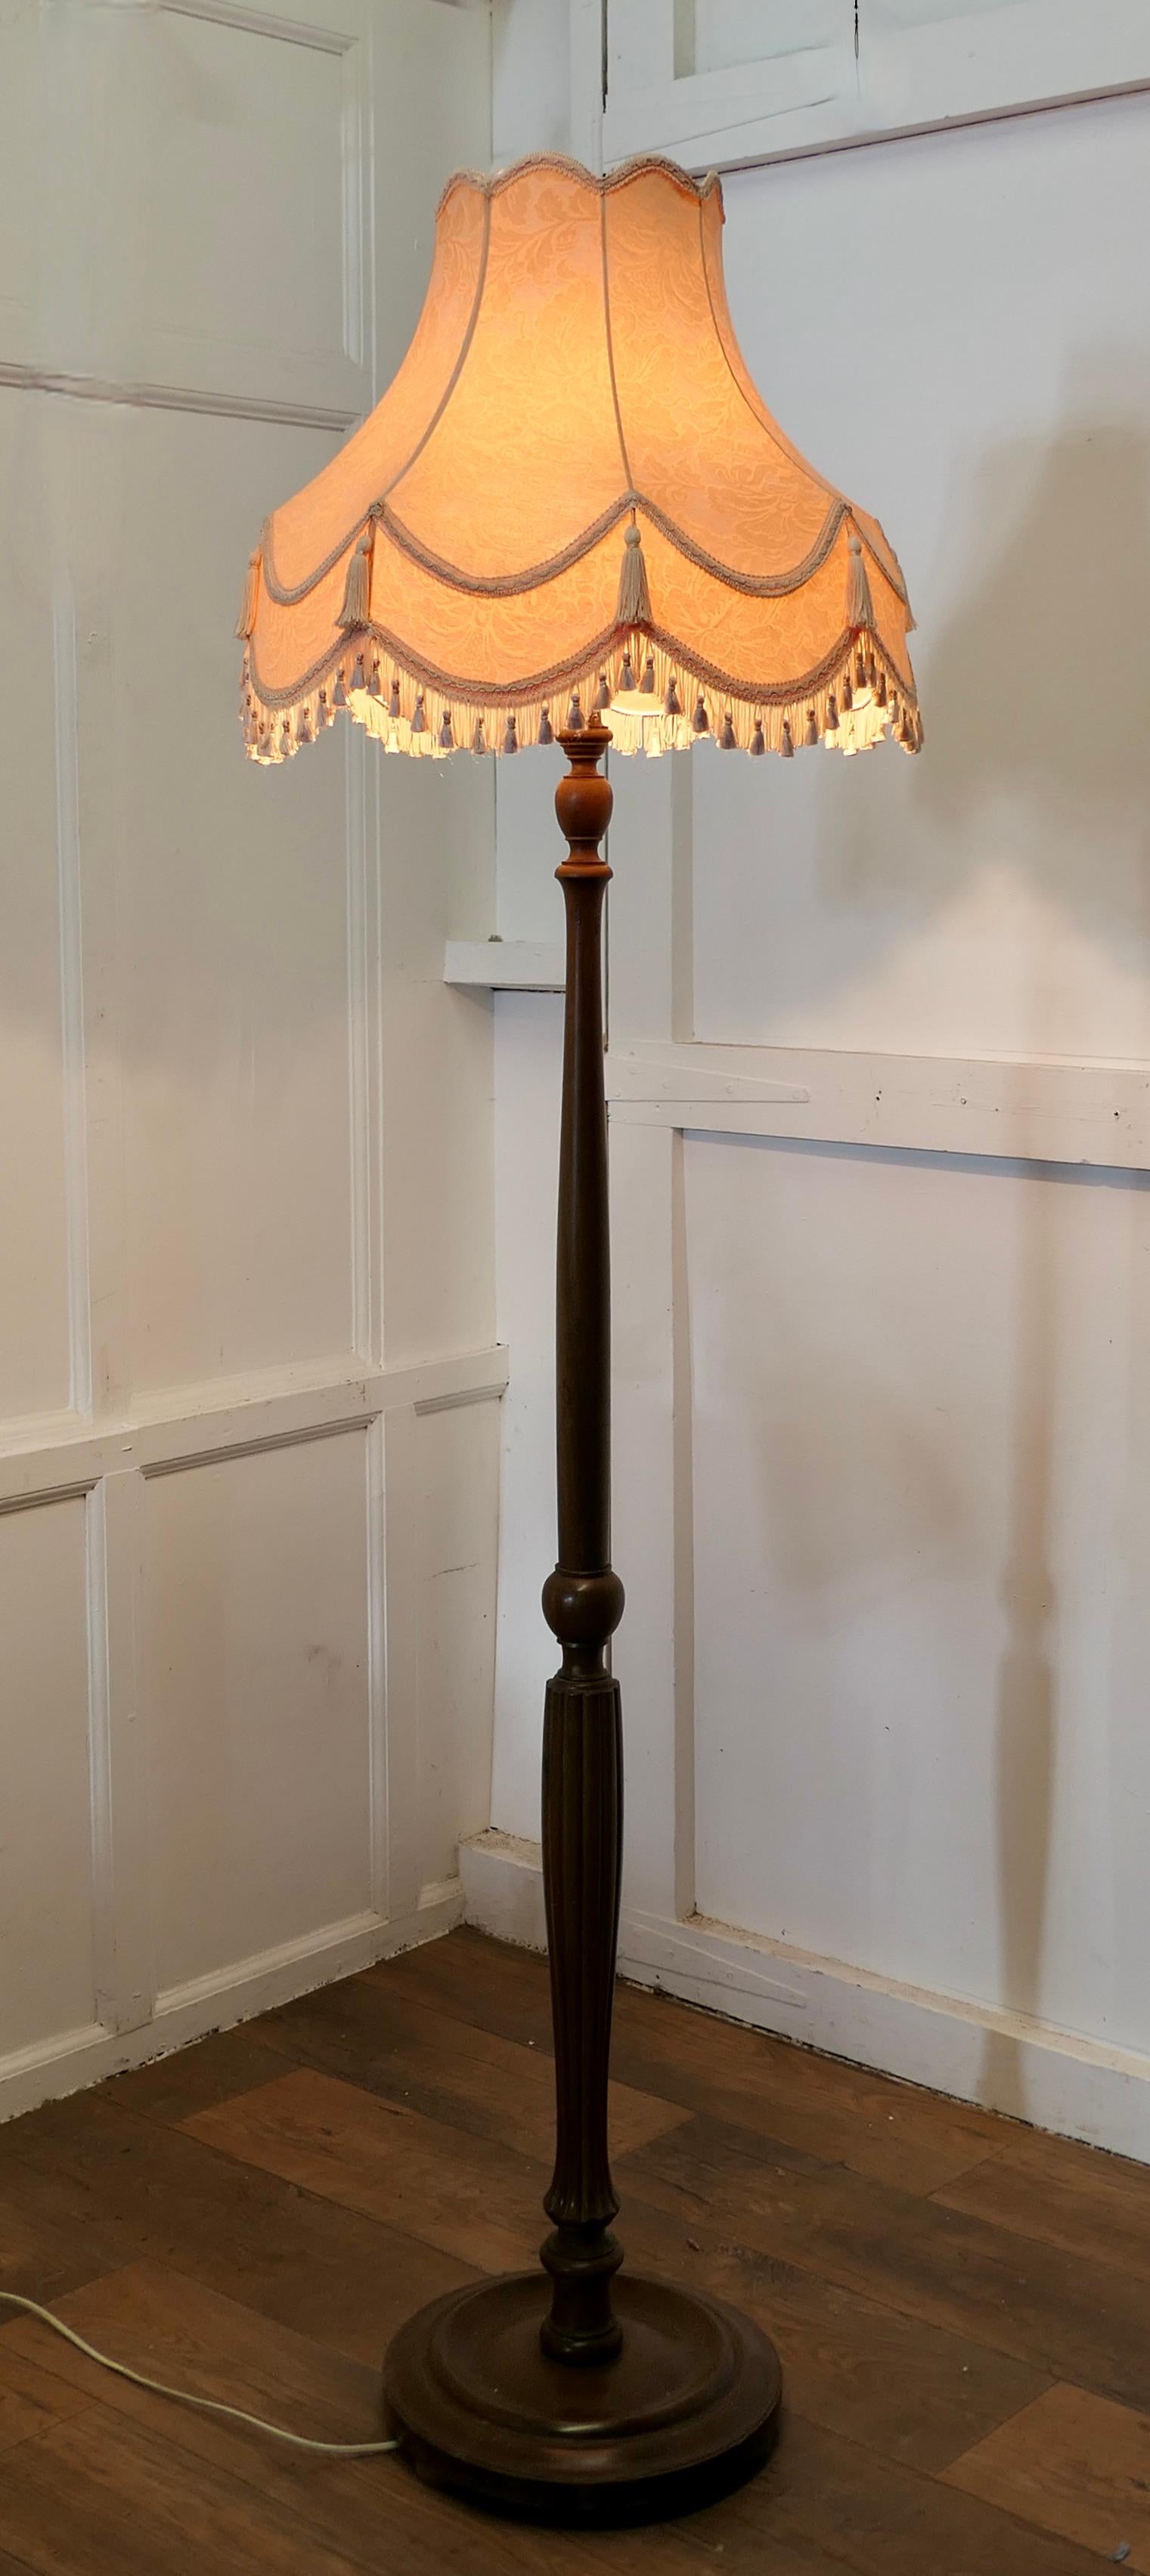  Superb Turned and Fluted Standard or Floor Lamp 

This is a very stylish piece, the turned walnut base supports a shaped and fluted central column
The lamp is in good condition, working and with a charming Peach brocade fringed lamp shade
The lamp